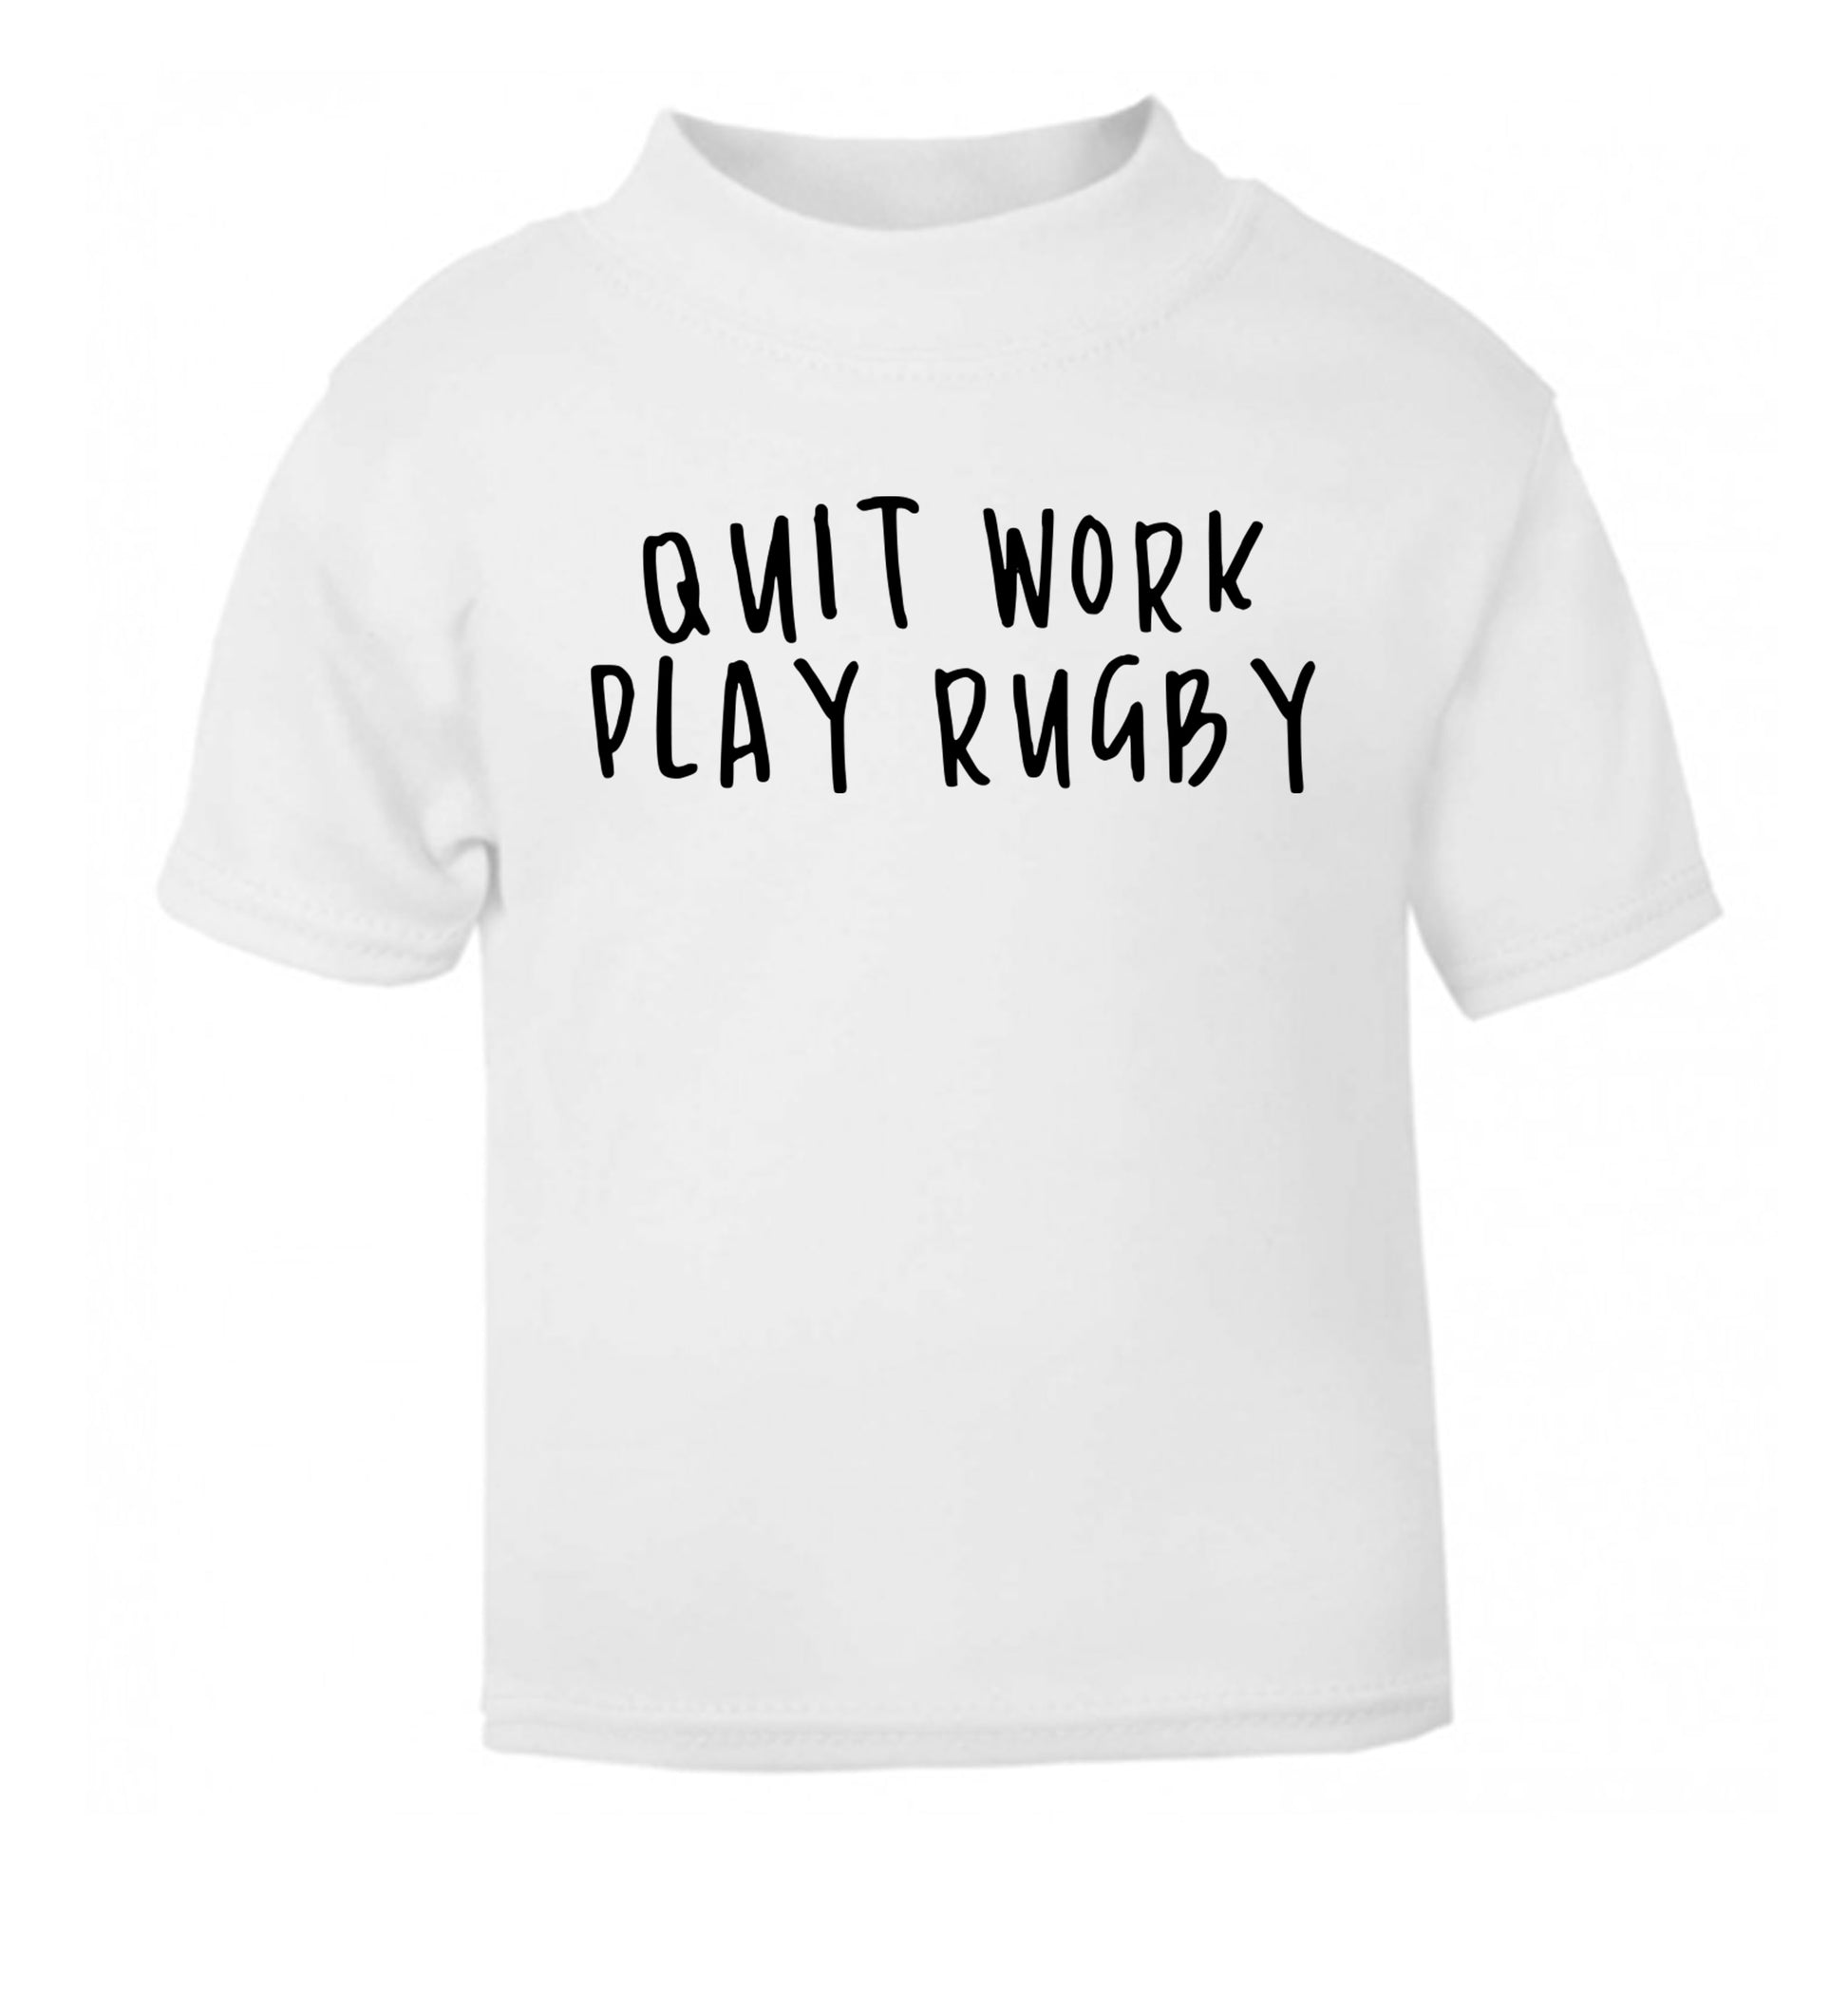 Quit work play rugby white Baby Toddler Tshirt 2 Years